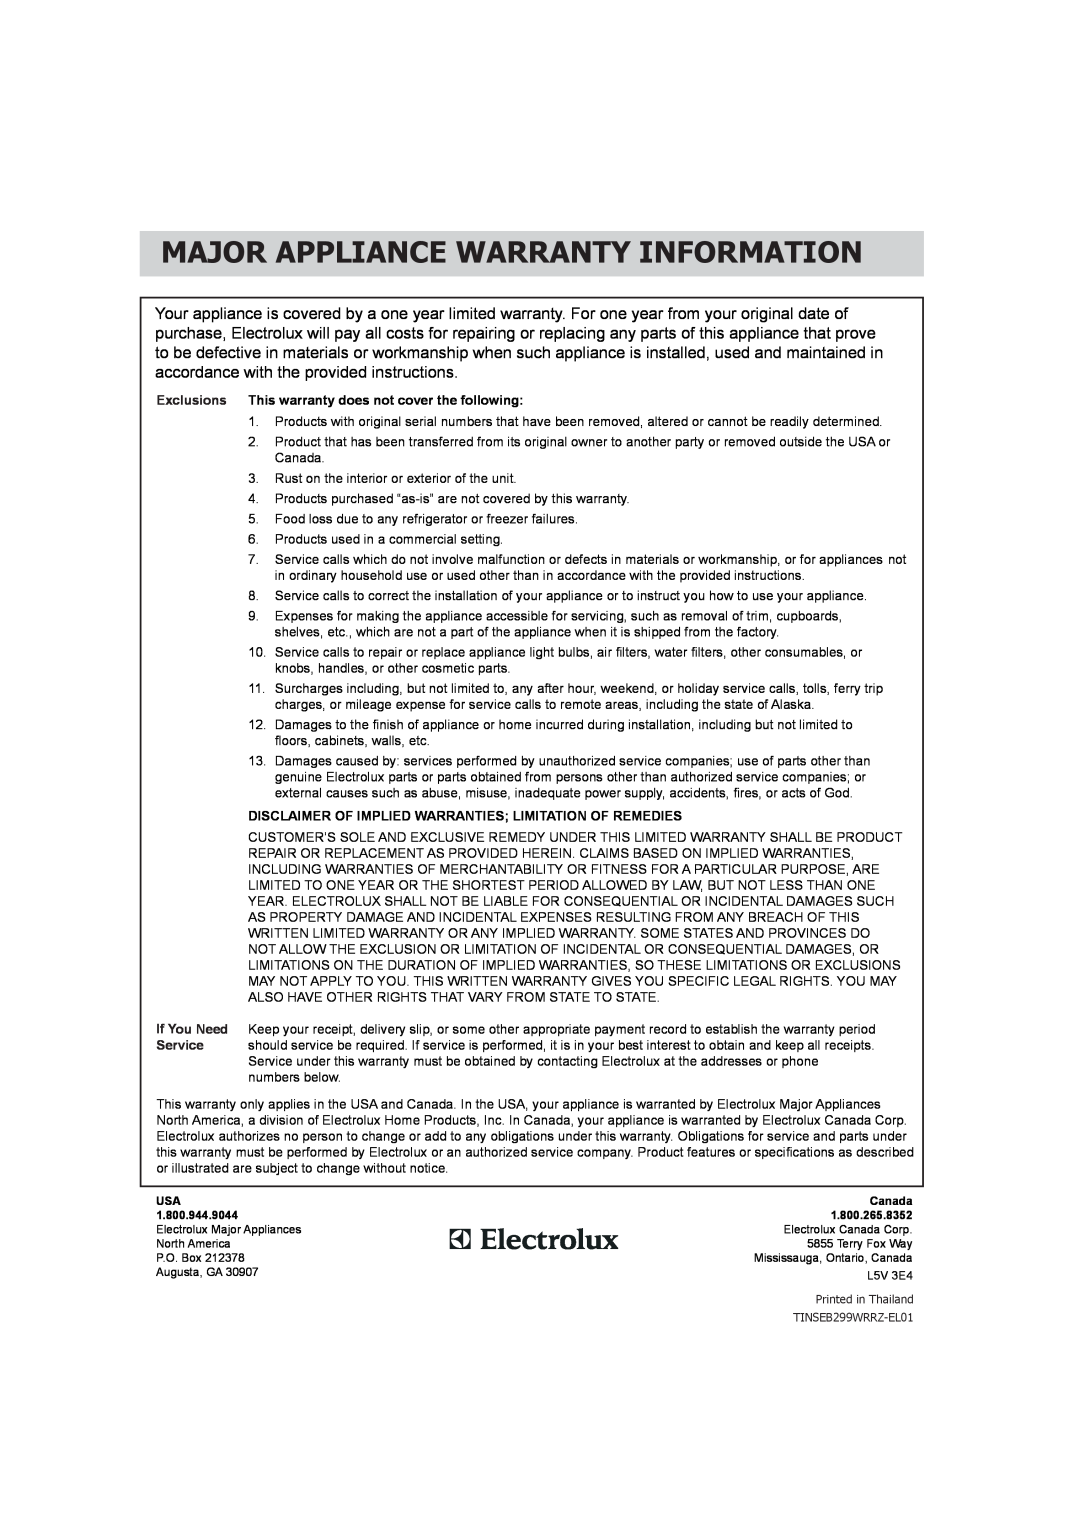 Frigidaire FGMV173KQ Major Appliance Warranty Information, Exclusions This warranty does not cover the following 